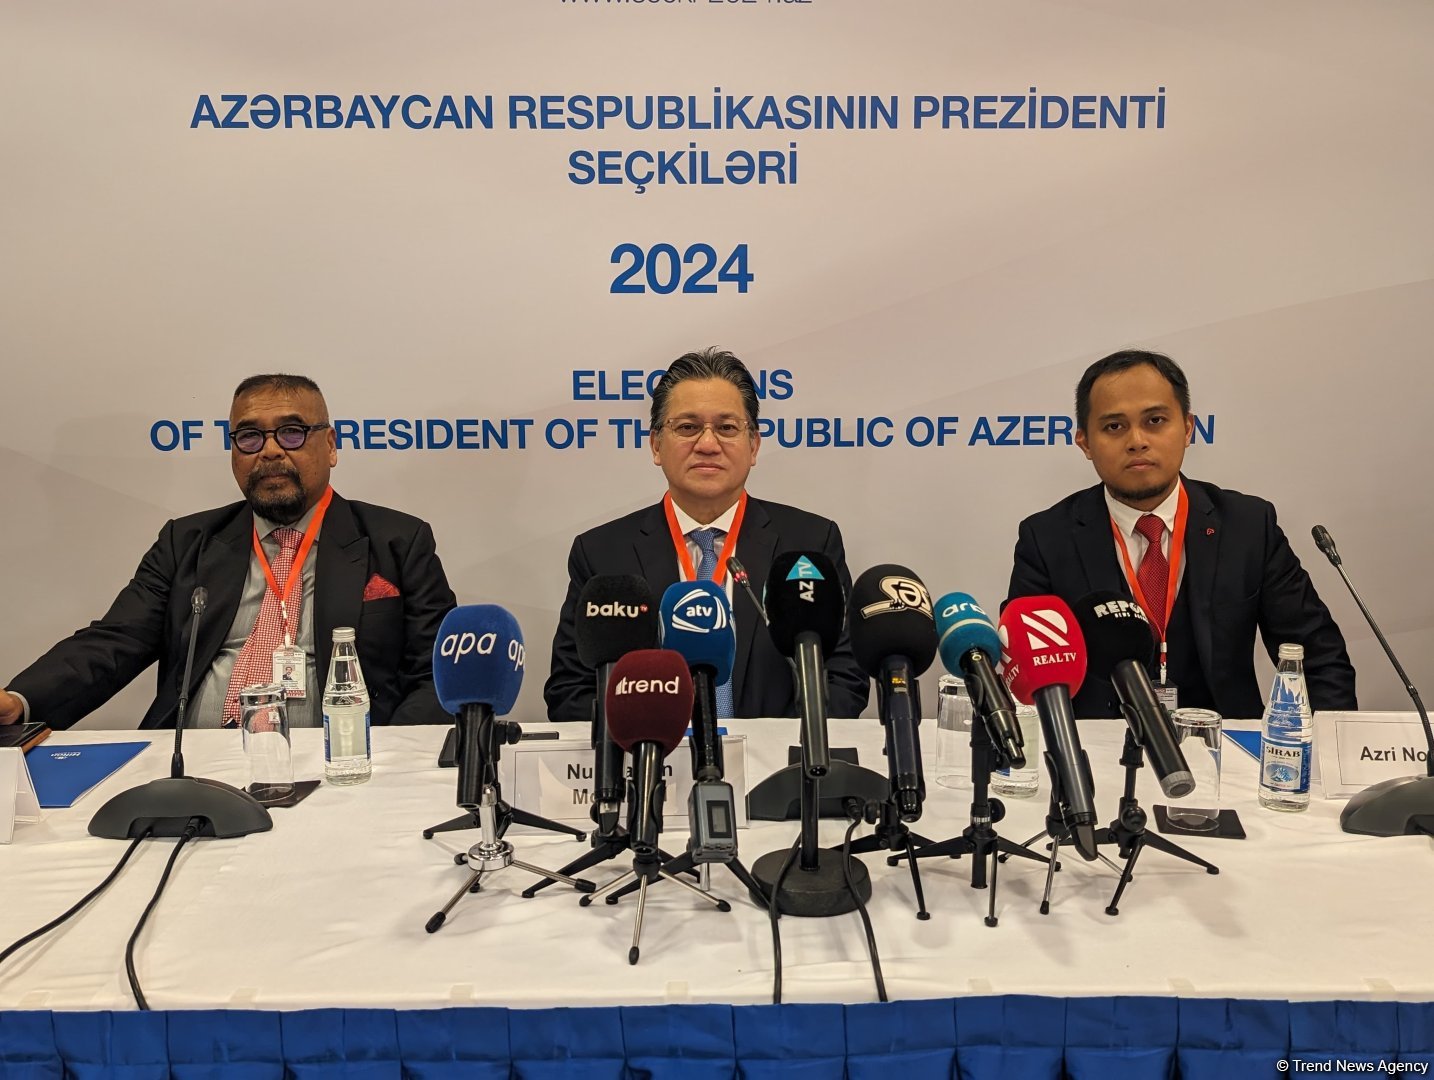 Presidential election in Azerbaijan conducted transparently - Deputy Chairman of Malaysian Senate